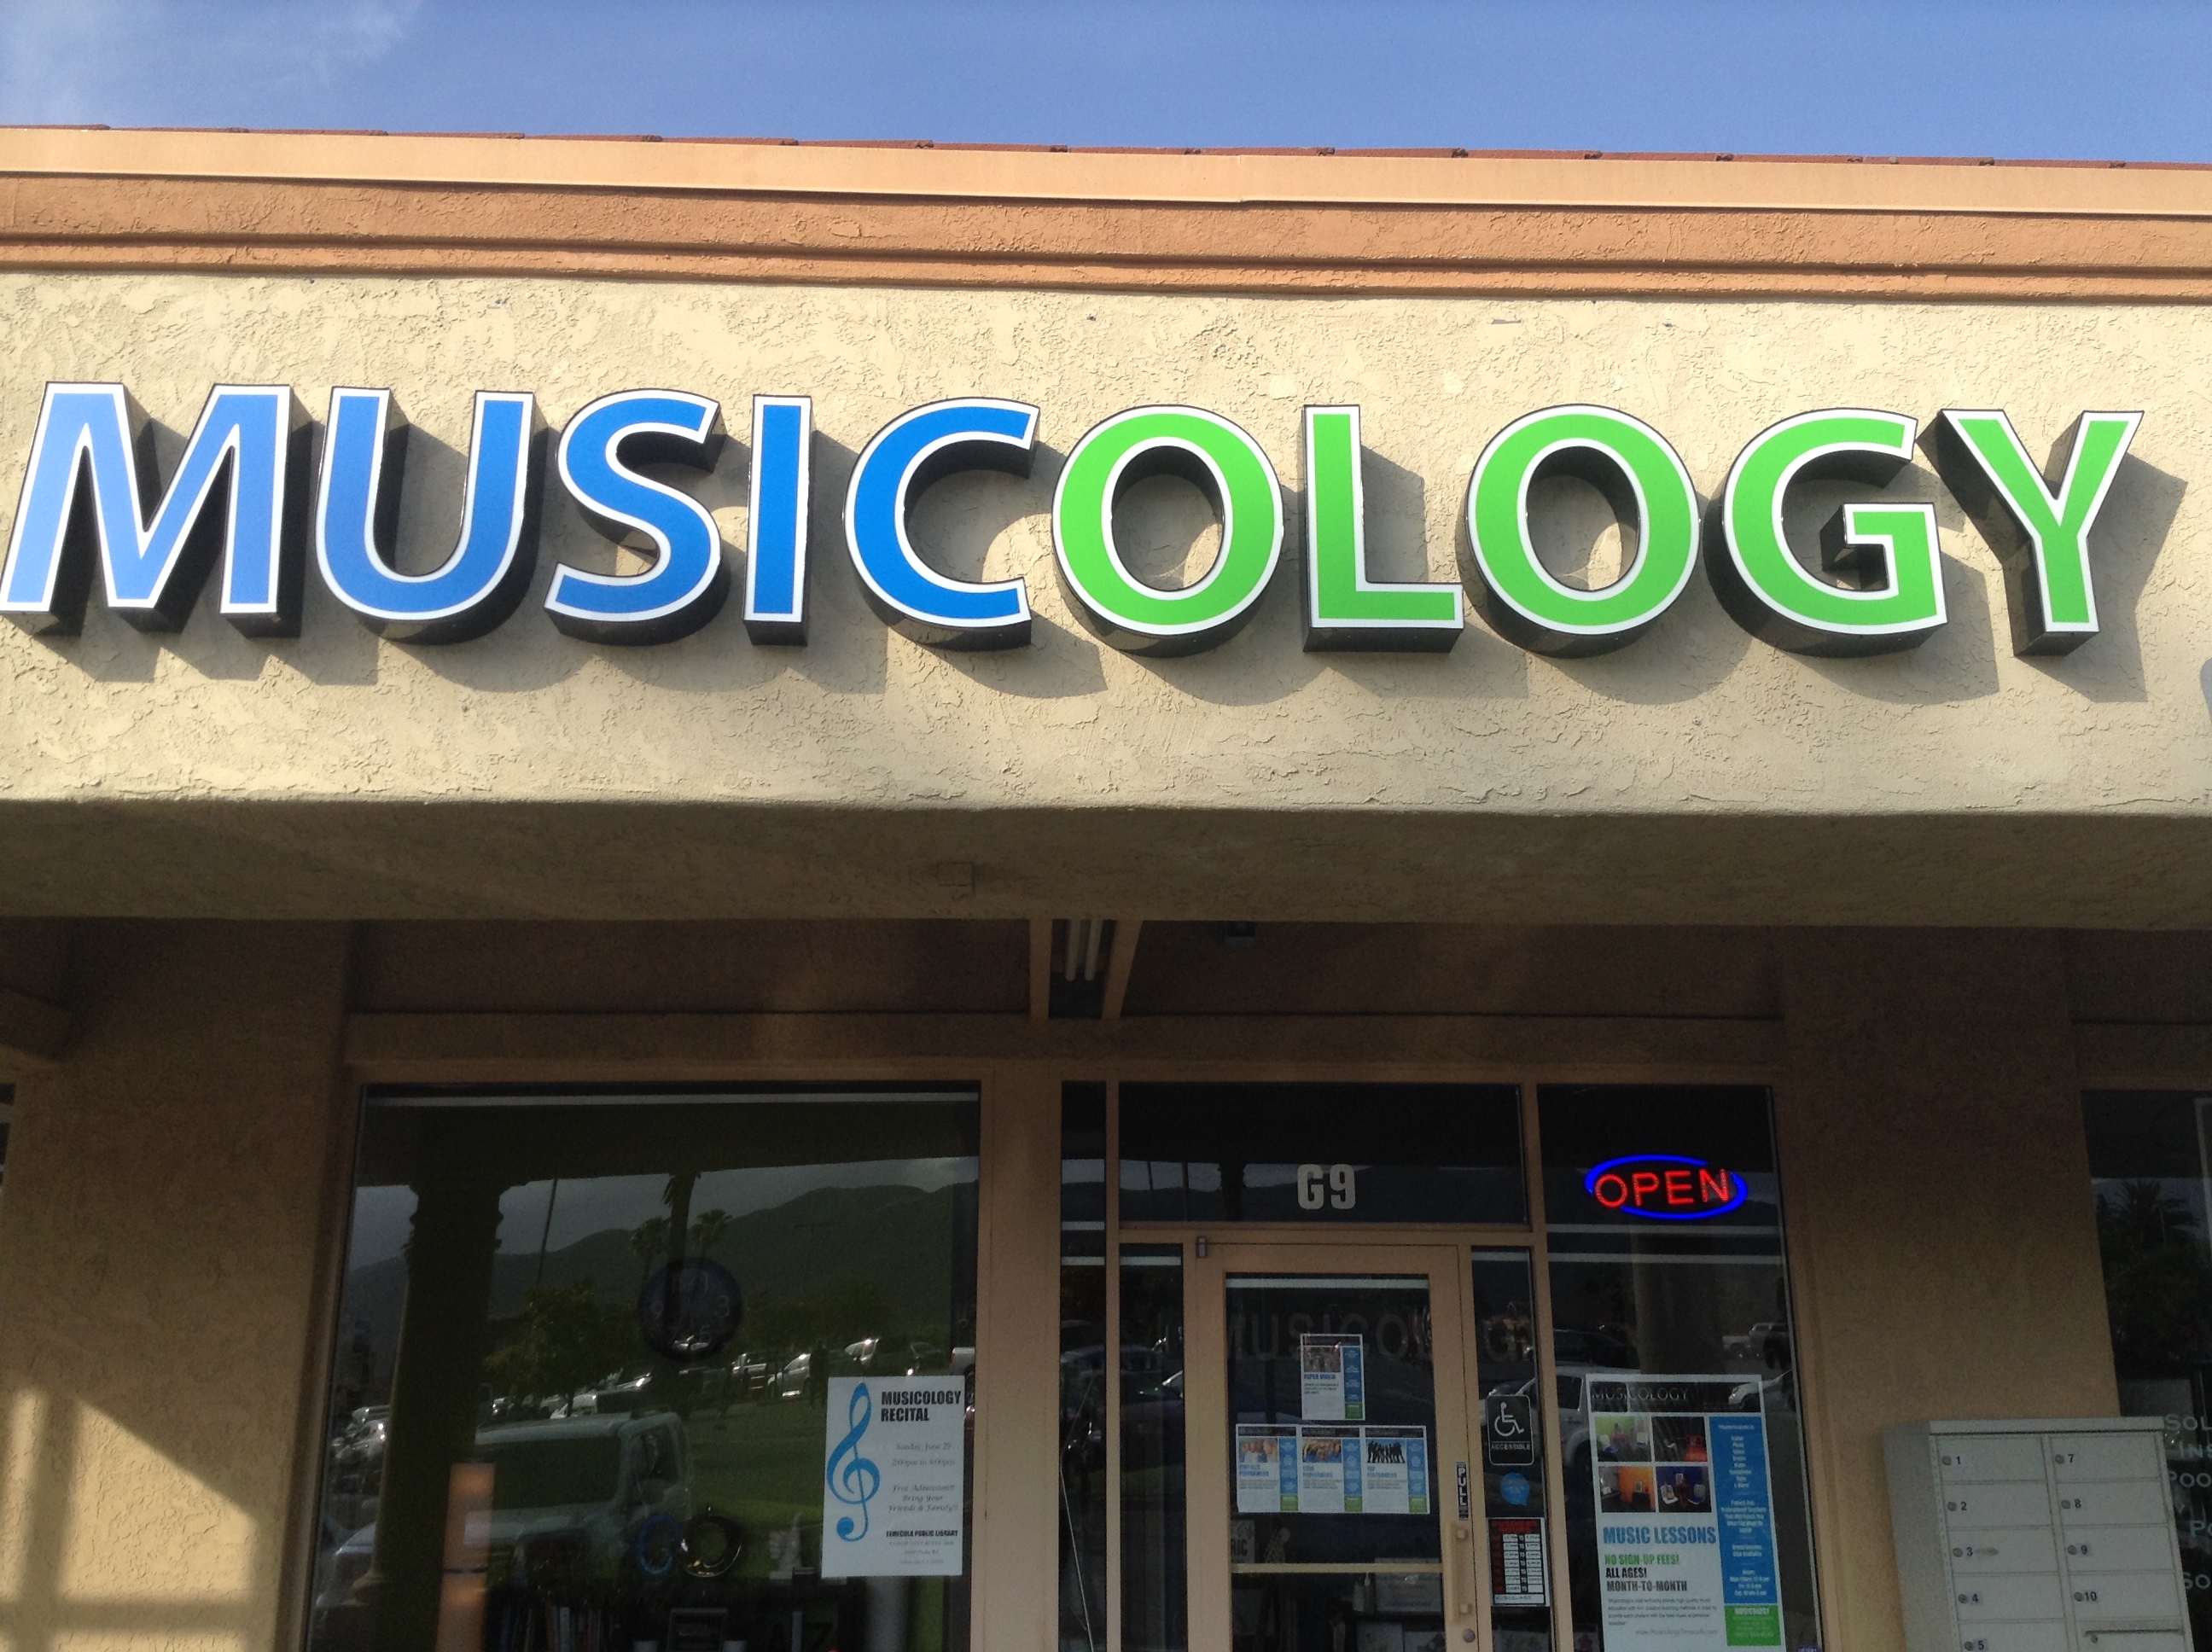 Musicology's is located in Temecula, CA